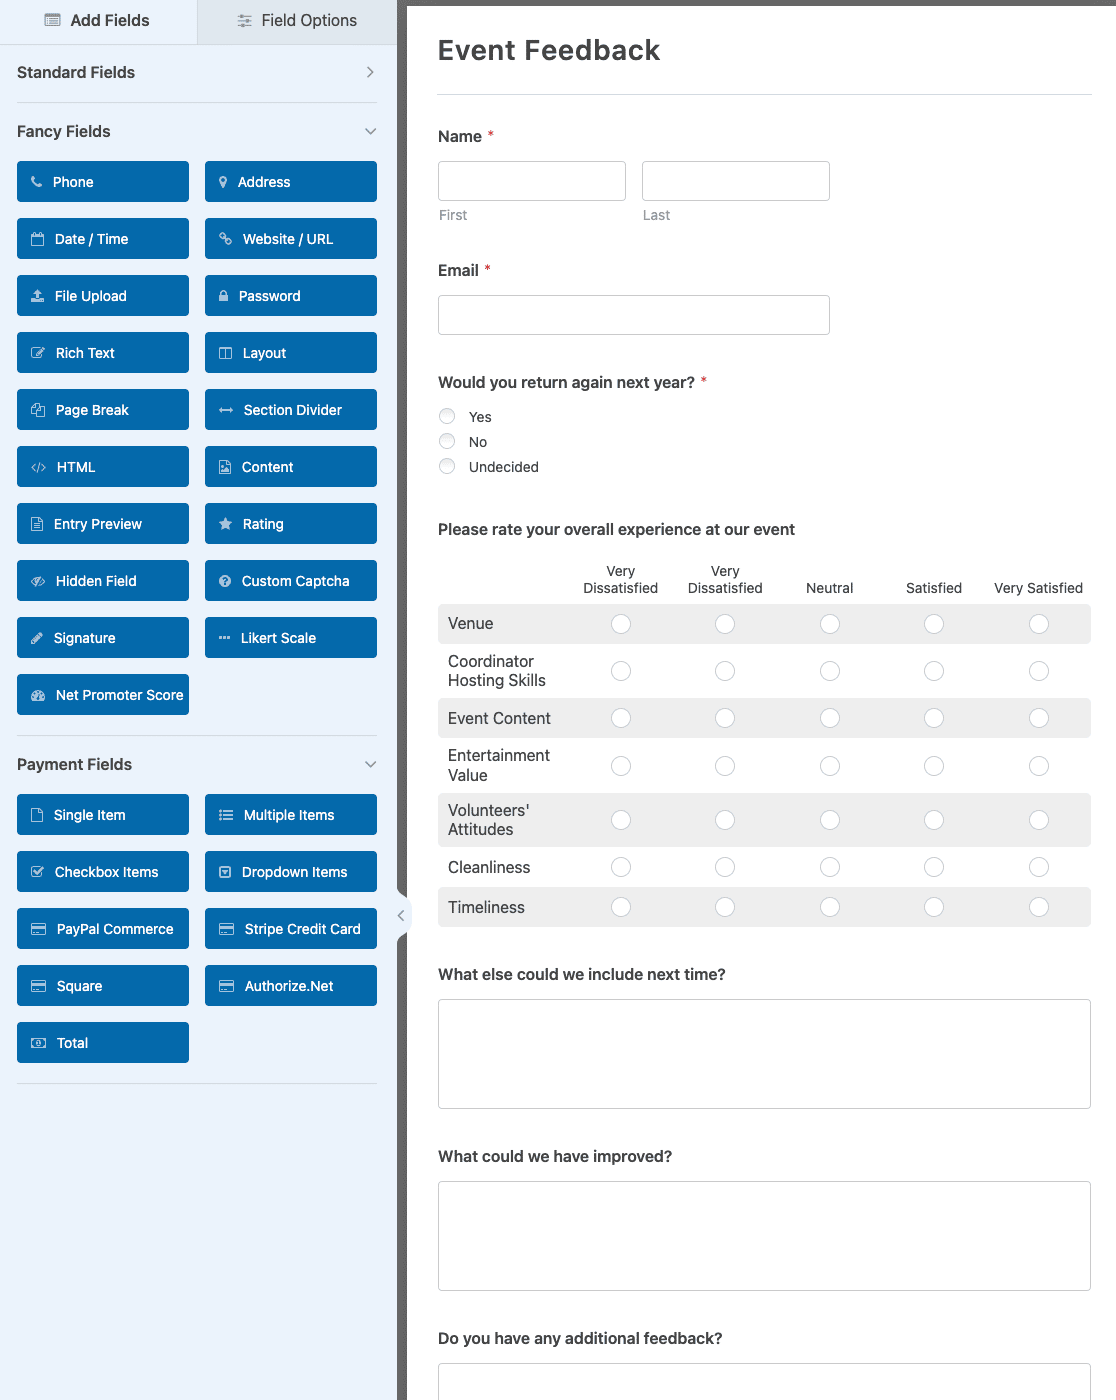 Customizing the Event Evaluation Form template